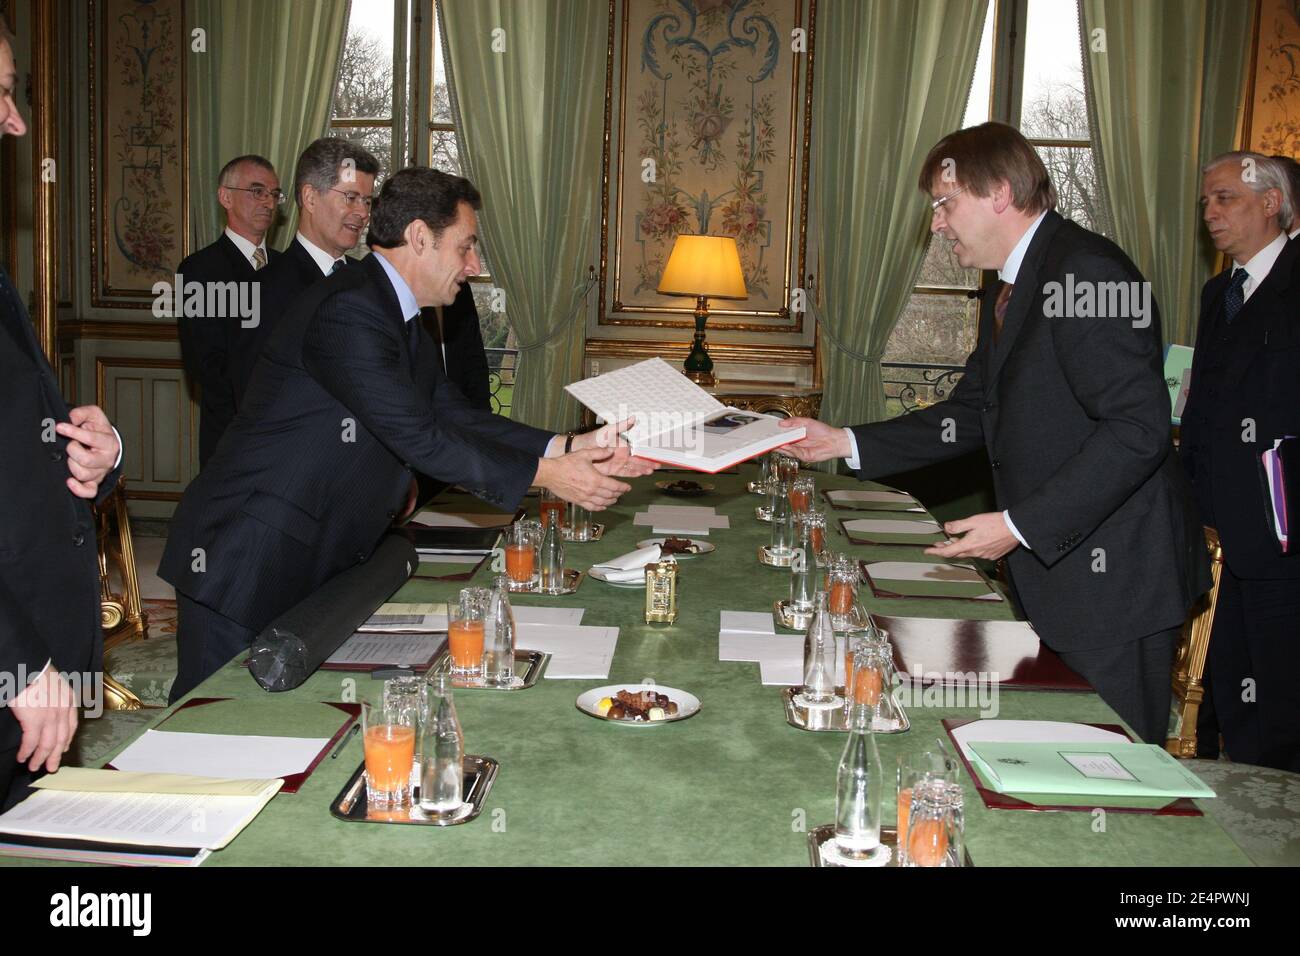 French president Nicolas Sarkozy receives a book by Belgian painter Pierre Alechinsky from Belgium's Prime Minister Guy Verhofstadt during a meeting at the Elysee Palace in Paris, France, on February 20, 2008. Acting Belgian Prime Minister Guy Verhofstadt said on February 19, he will stand down on March 20 to be replaced by the leader of the Flemish Christian Democrats, Yves Leterme. Photo by Alain Benainous/Pool/ABACAPRESS.COM Local Caption 20/02/2008.French President Nicolas Sarkozy meeting with the Belgium s prime minister Pierre Alechinsky at the Elysee Palace Stock Photo